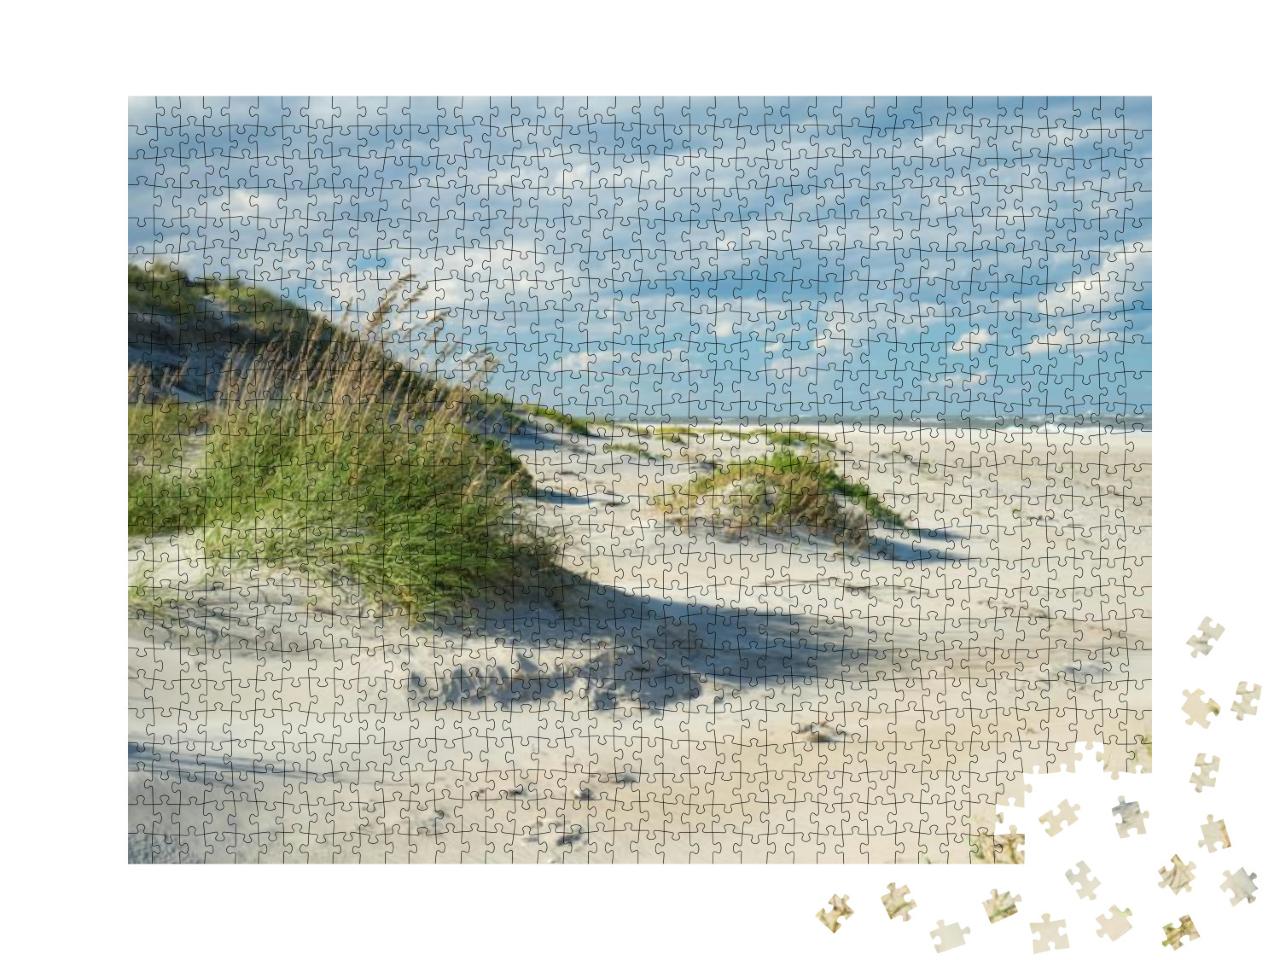 Outer Banks Sand Dunes & Grass Along the Coast of North C... Jigsaw Puzzle with 1000 pieces